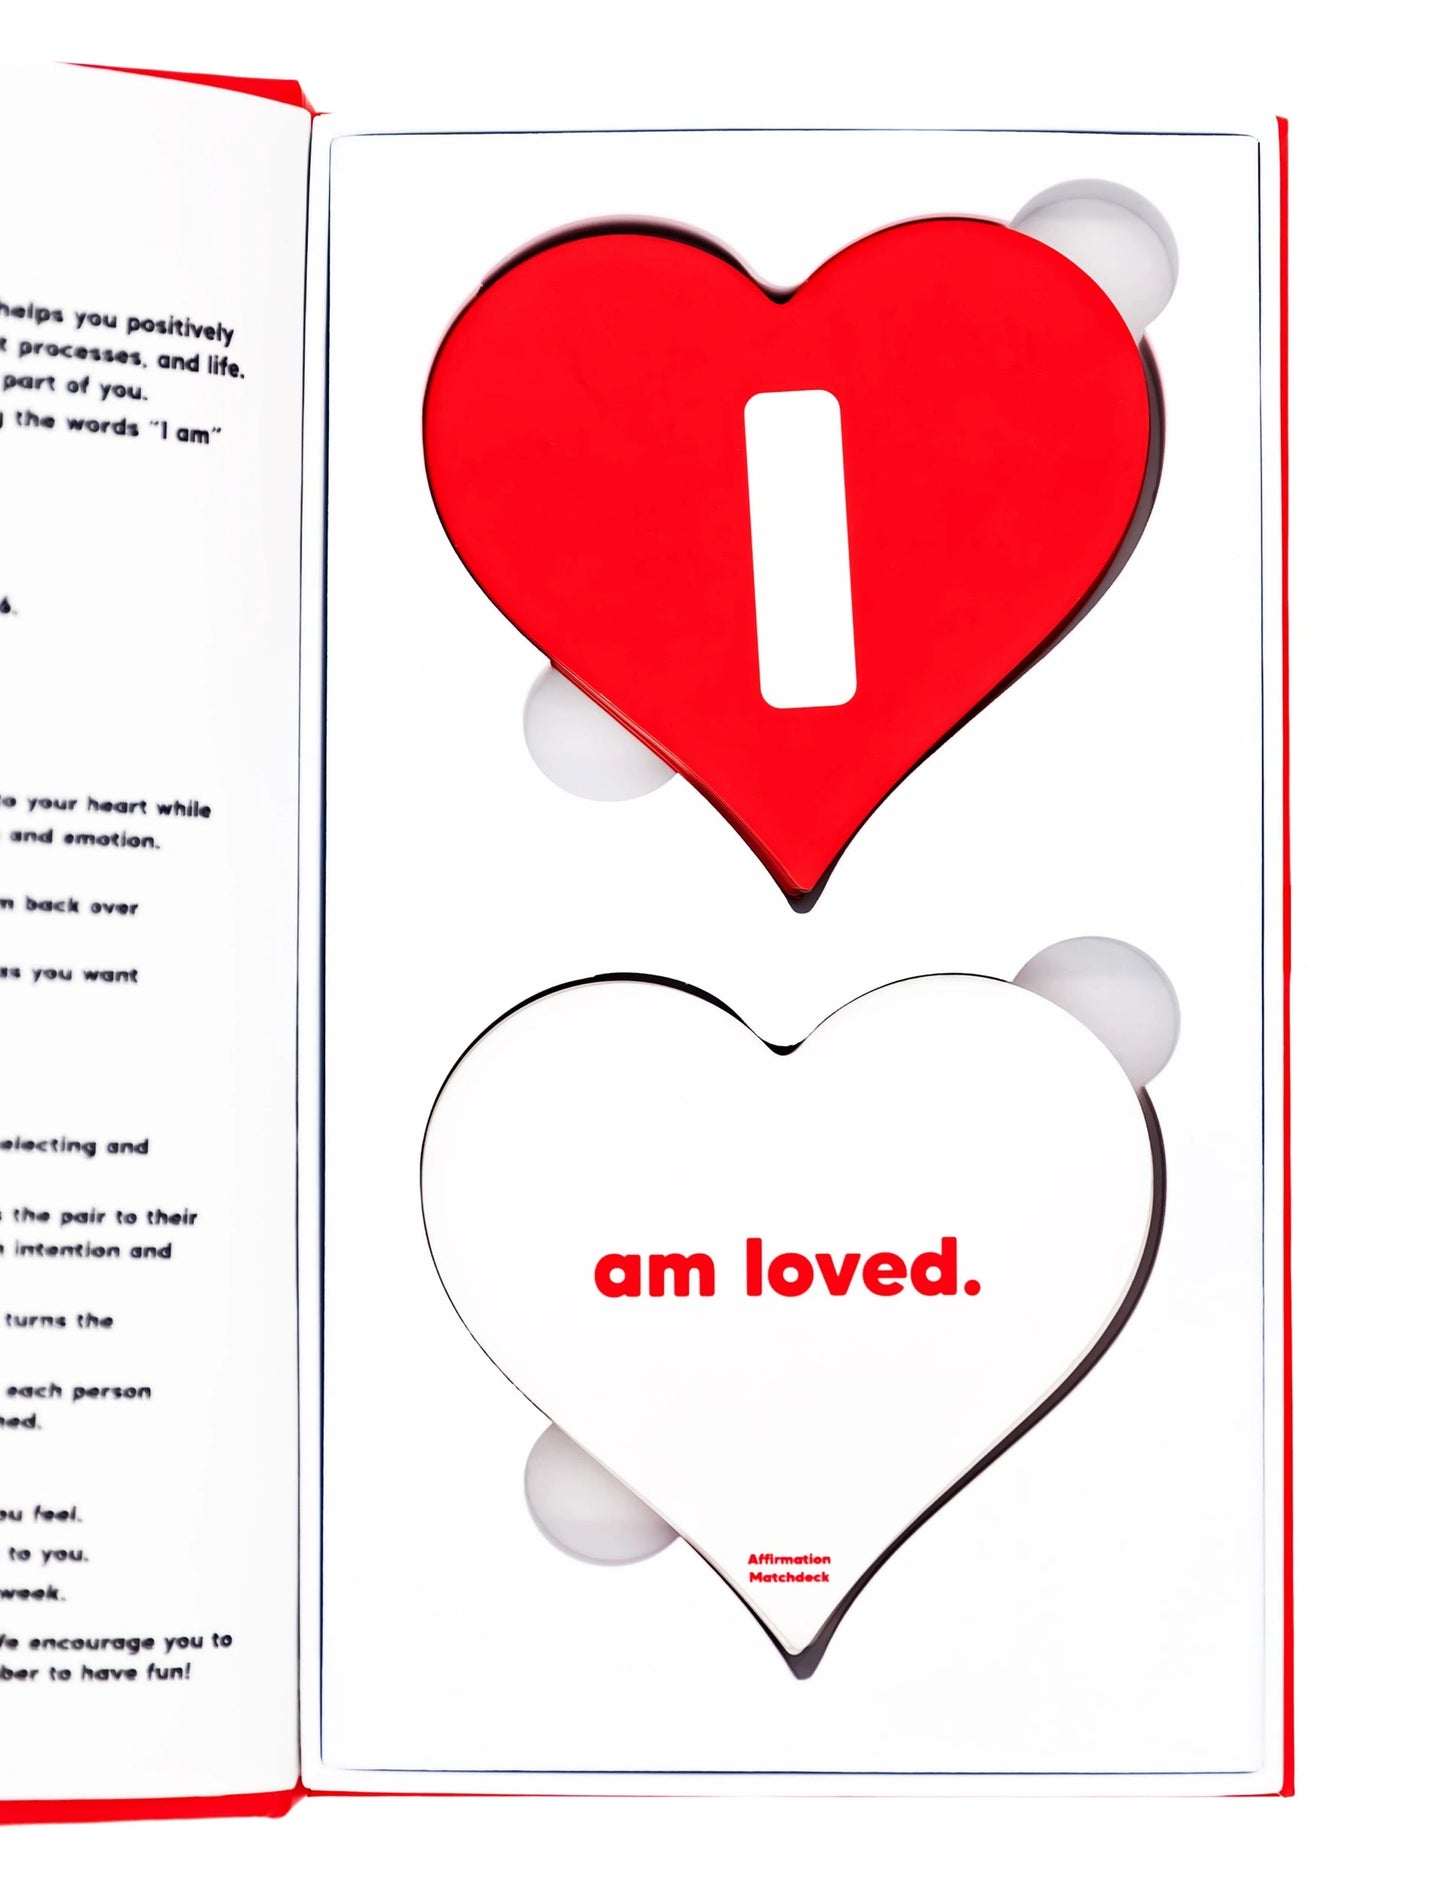 Open Affirmation Matchdeck box displaying two heart-shaped card decks with 'I' and 'am loved' text